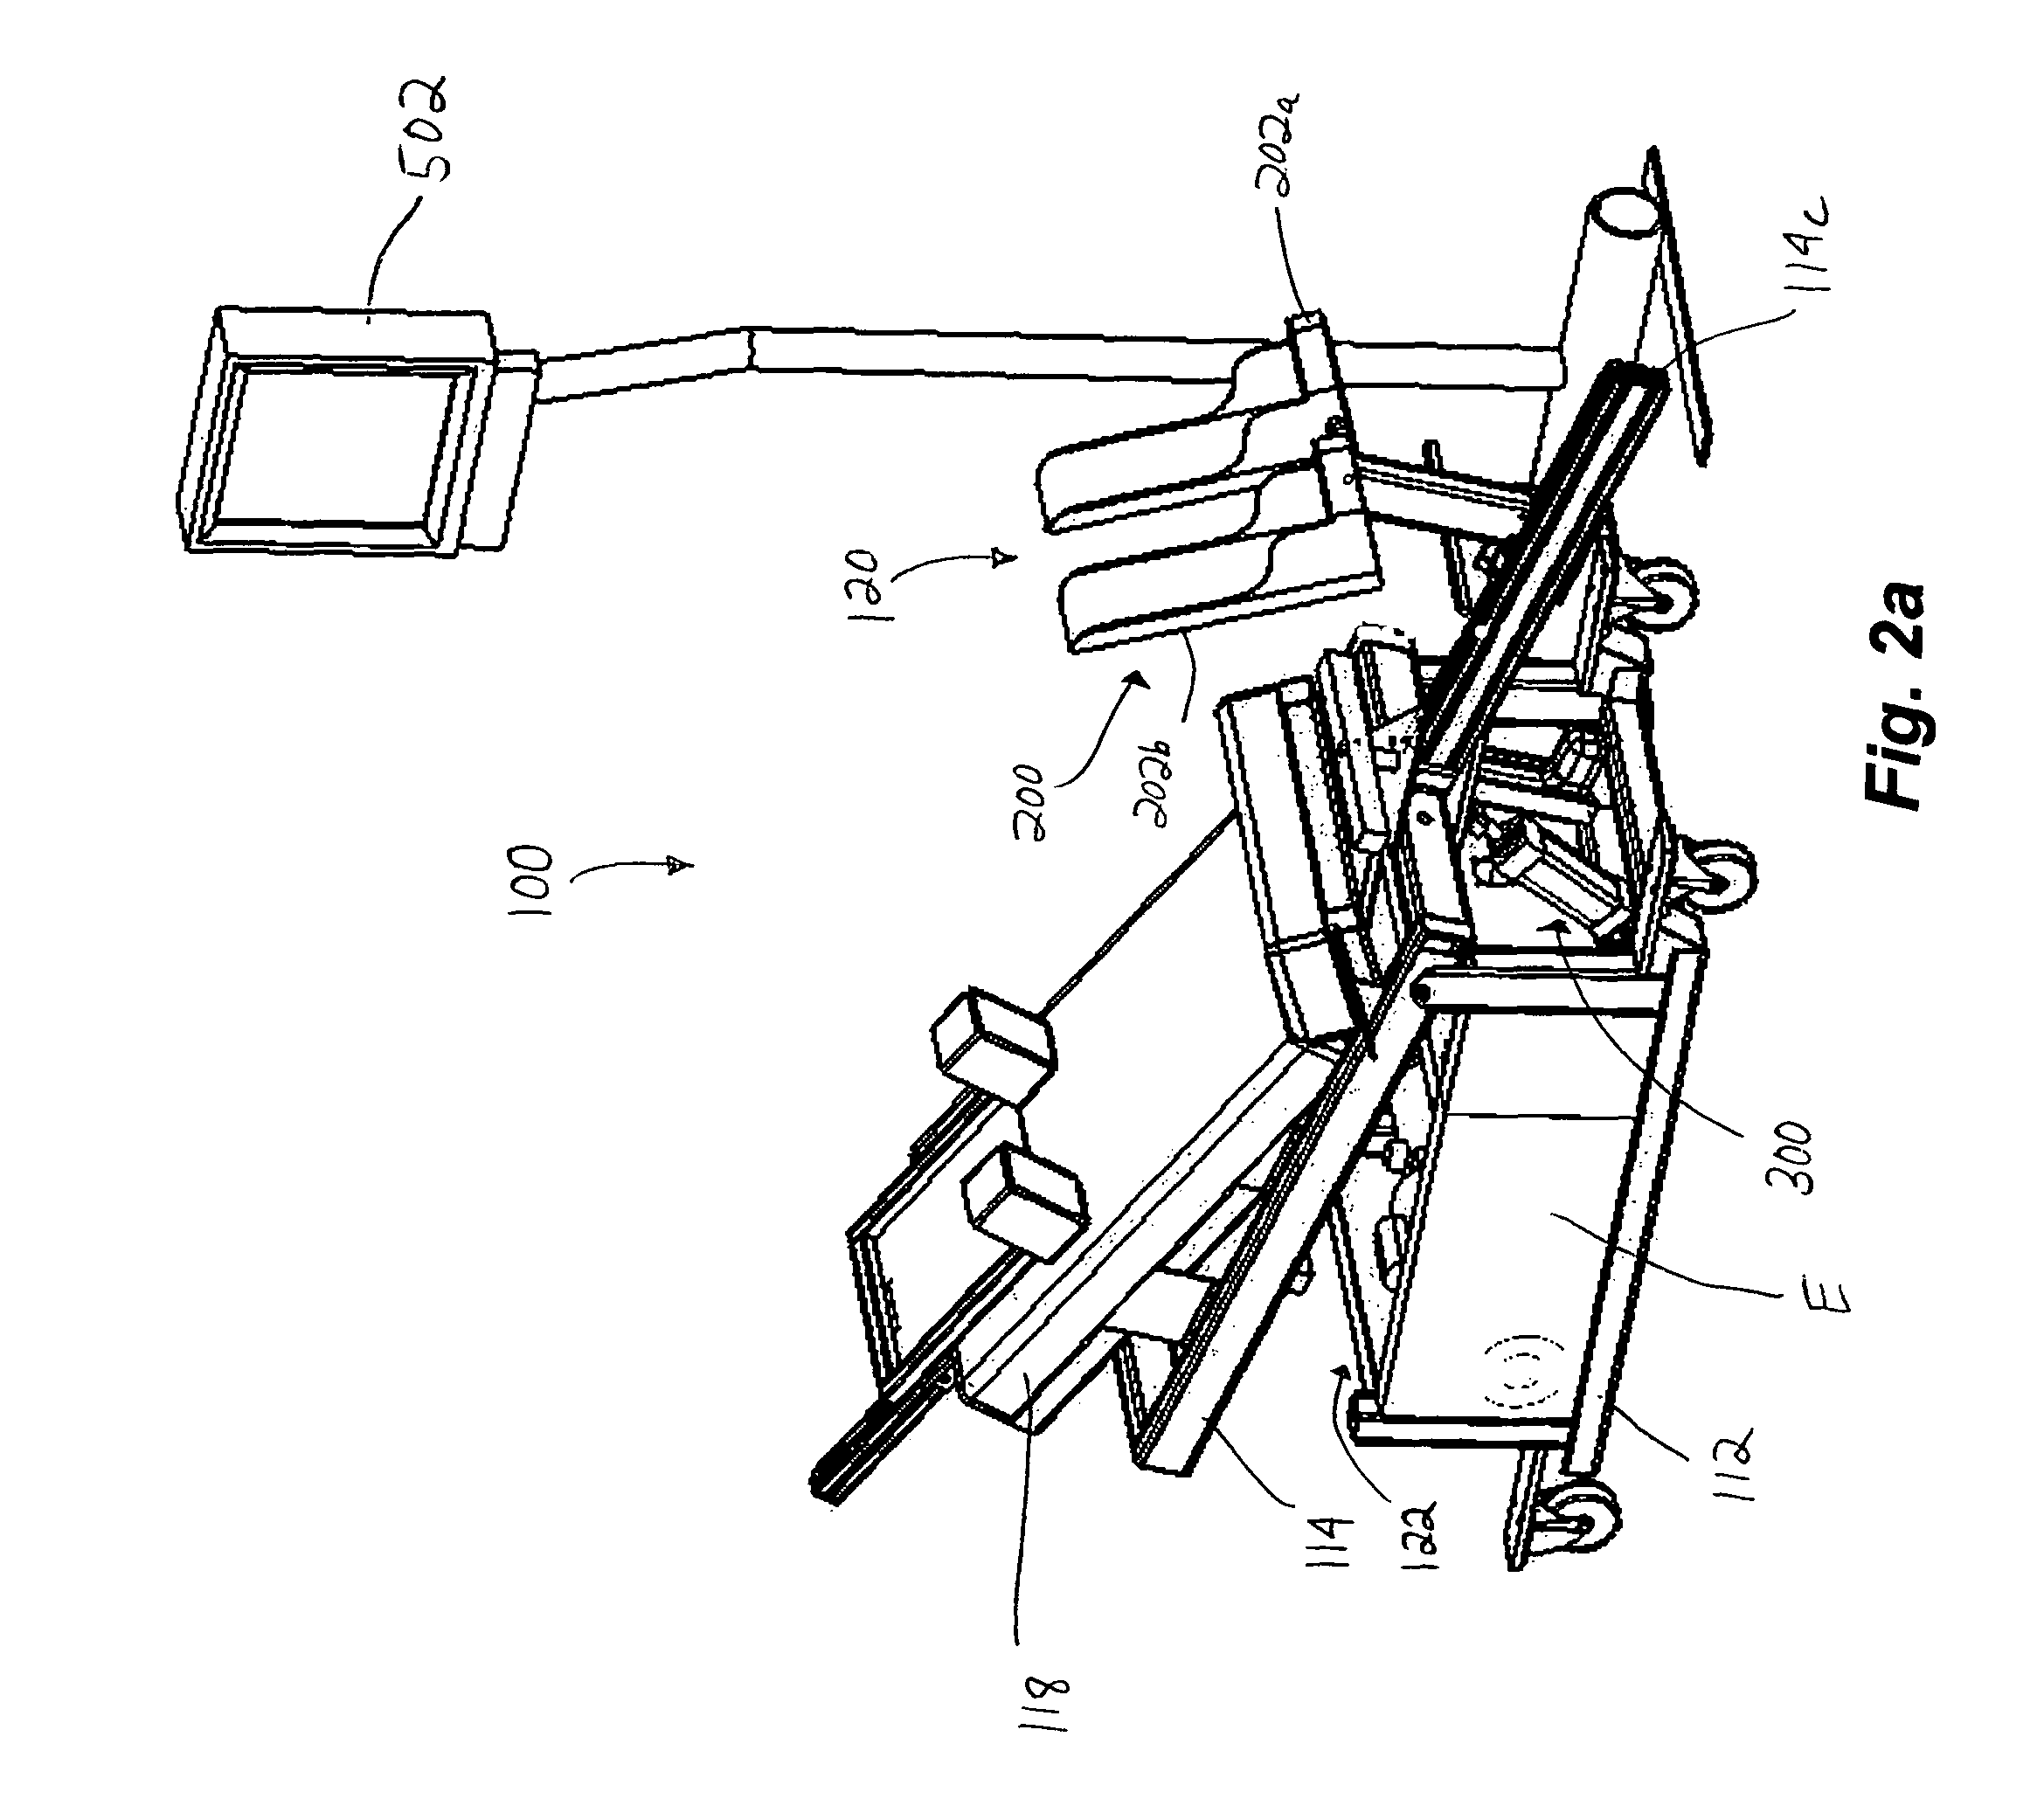 Lower extremity exercise device with stimulation and related methods